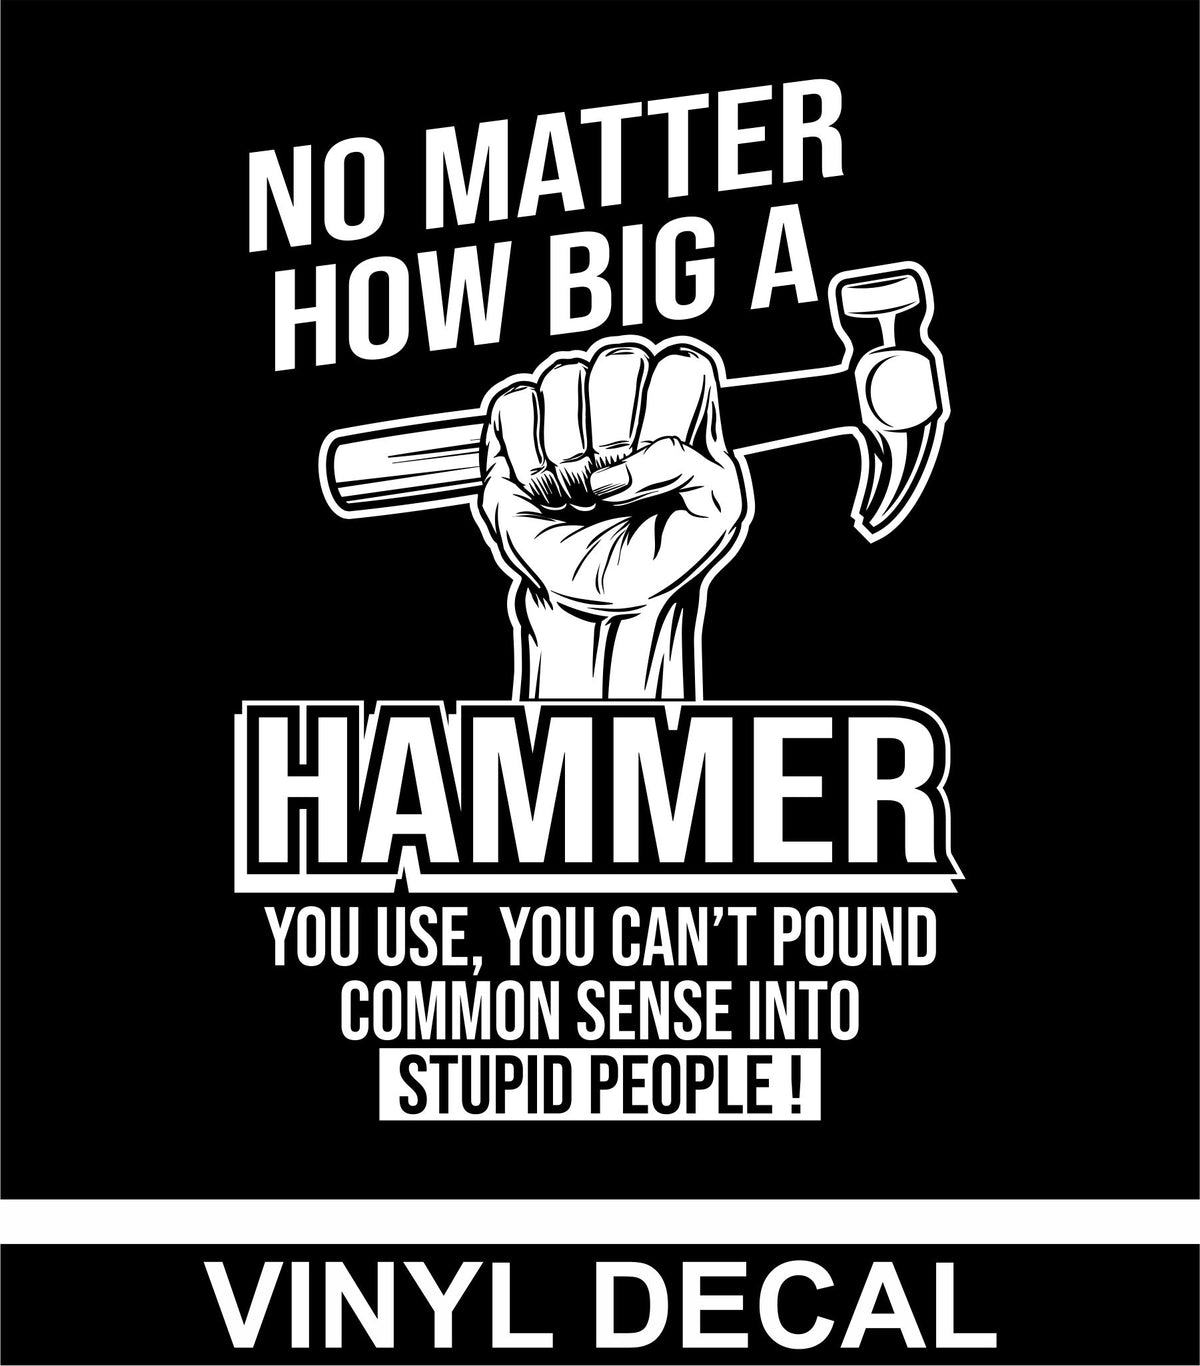 No Matter How Big The Hammer - Vinyl Decal - Free Shipping